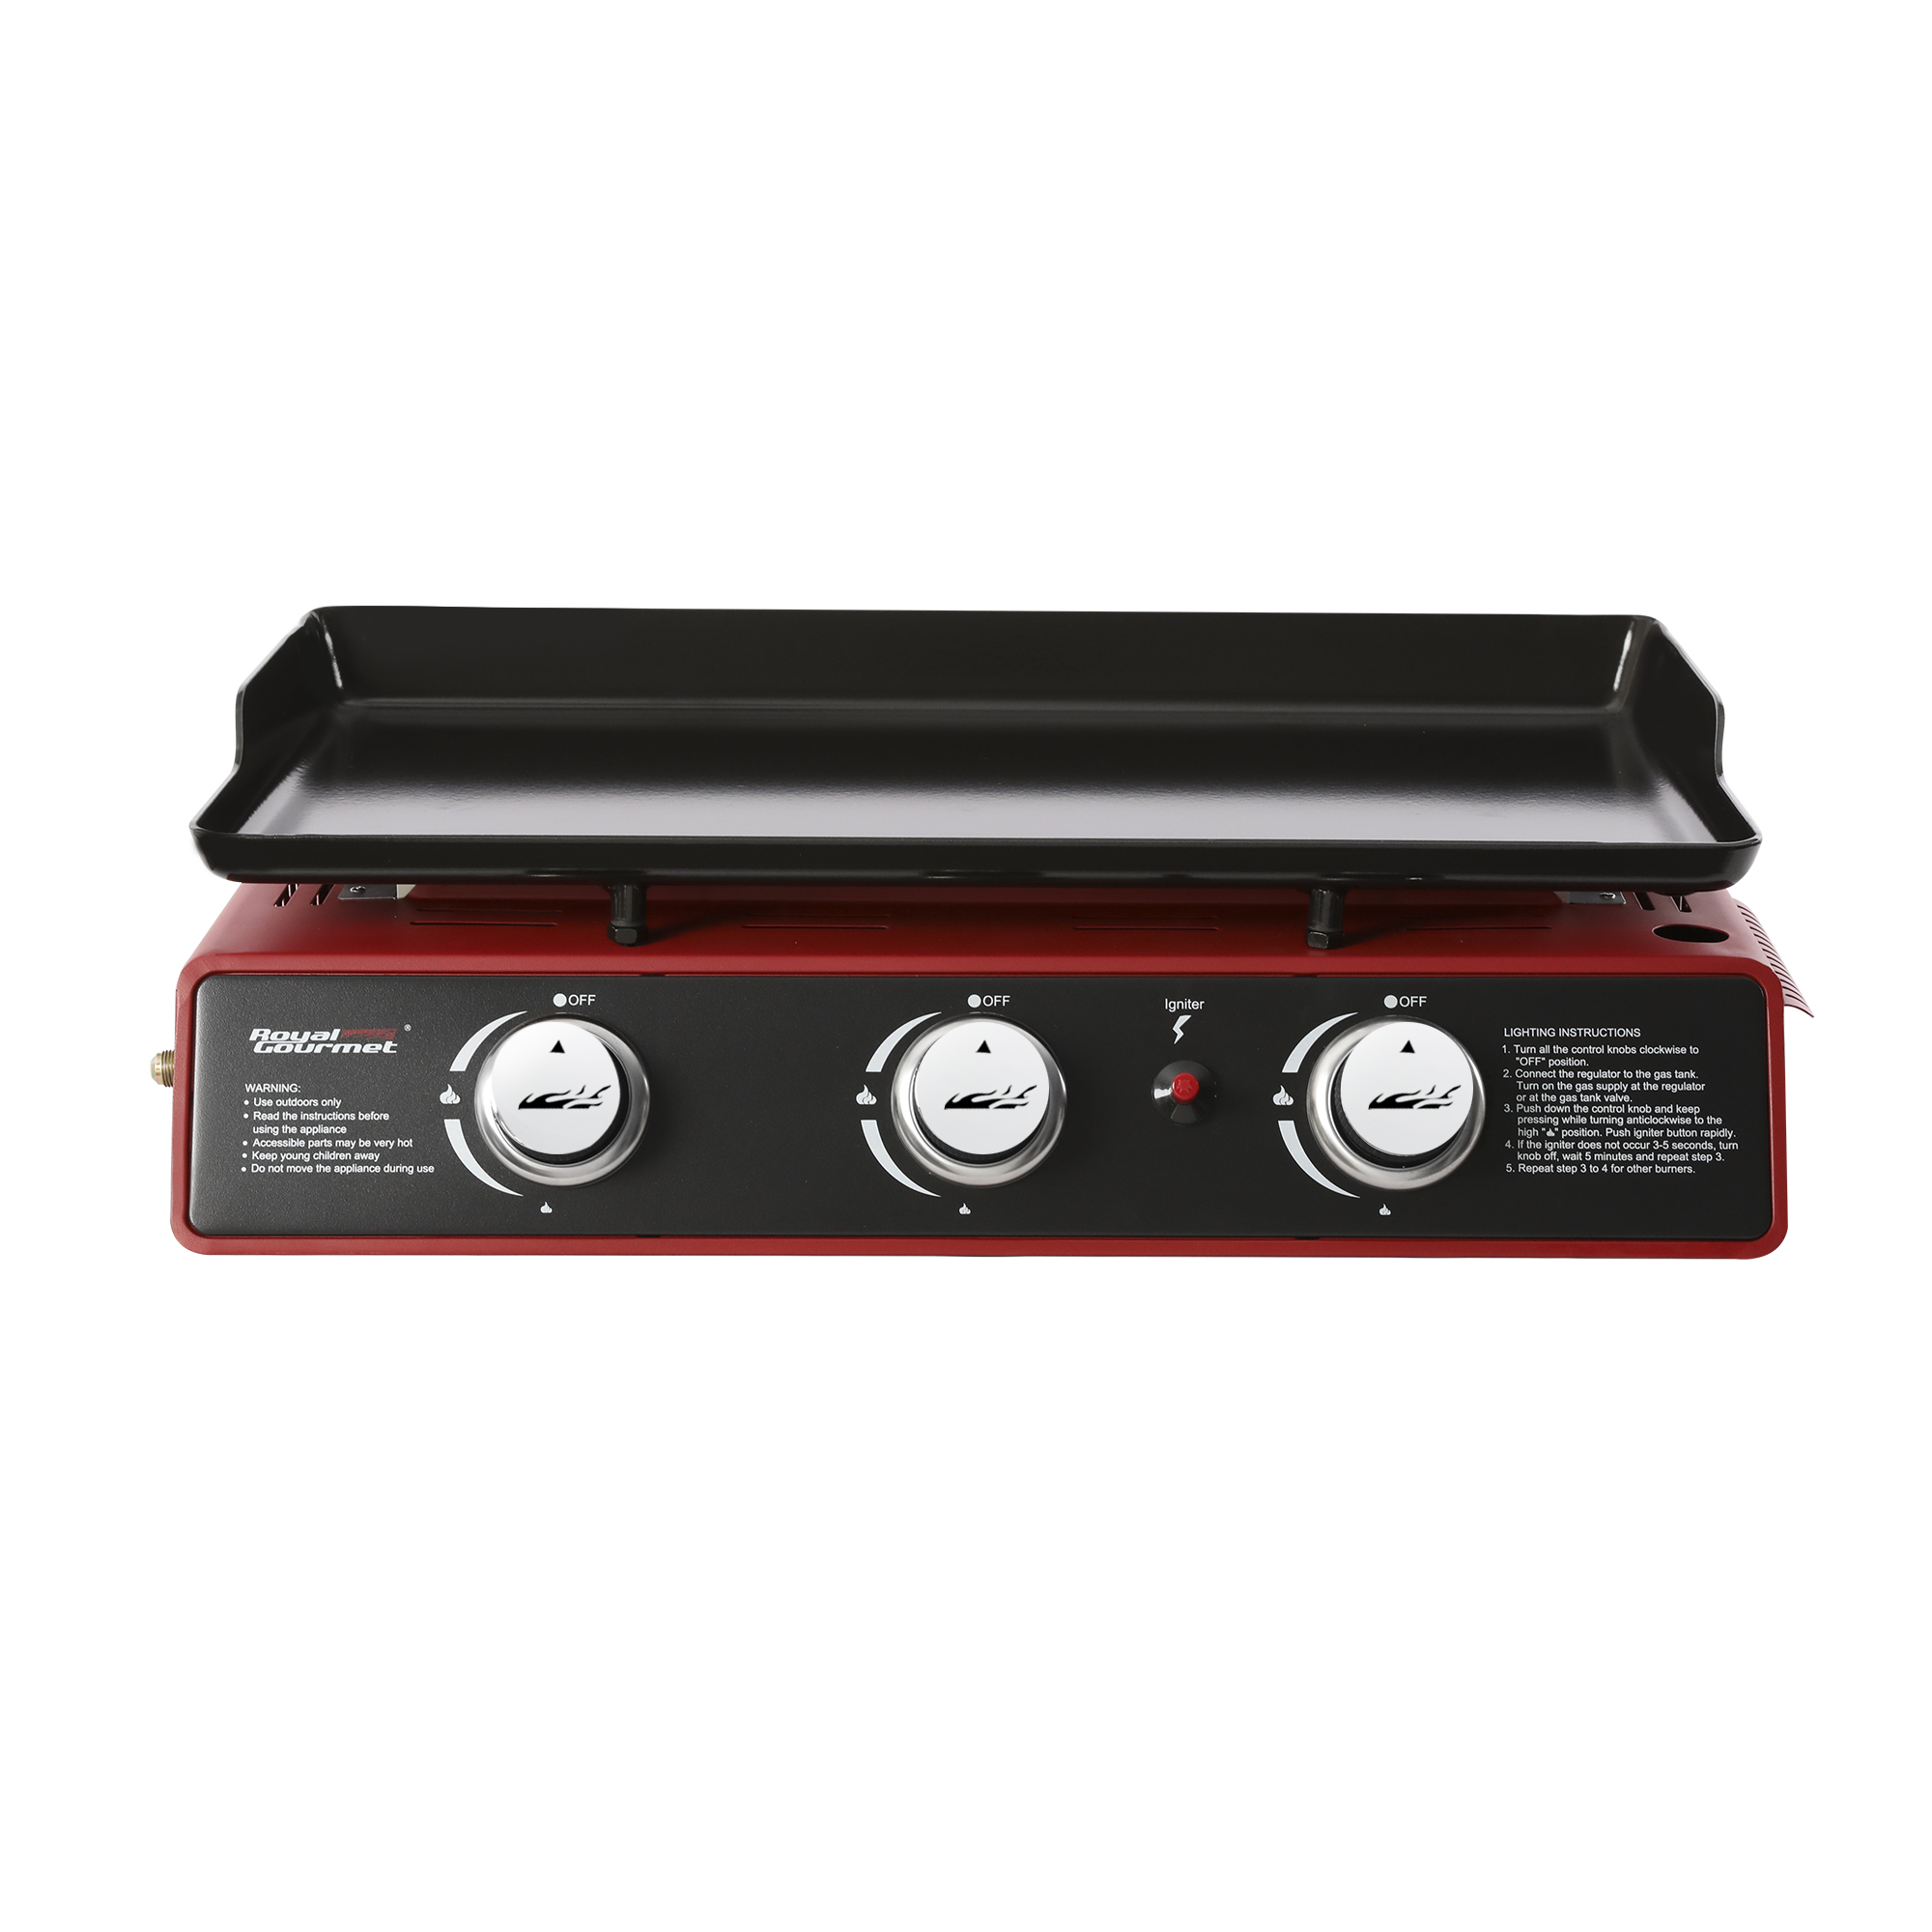 Royal Gourmet 3 Burner PD1301R Portable Tabletop 24" Gas Grill - image 1 of 6